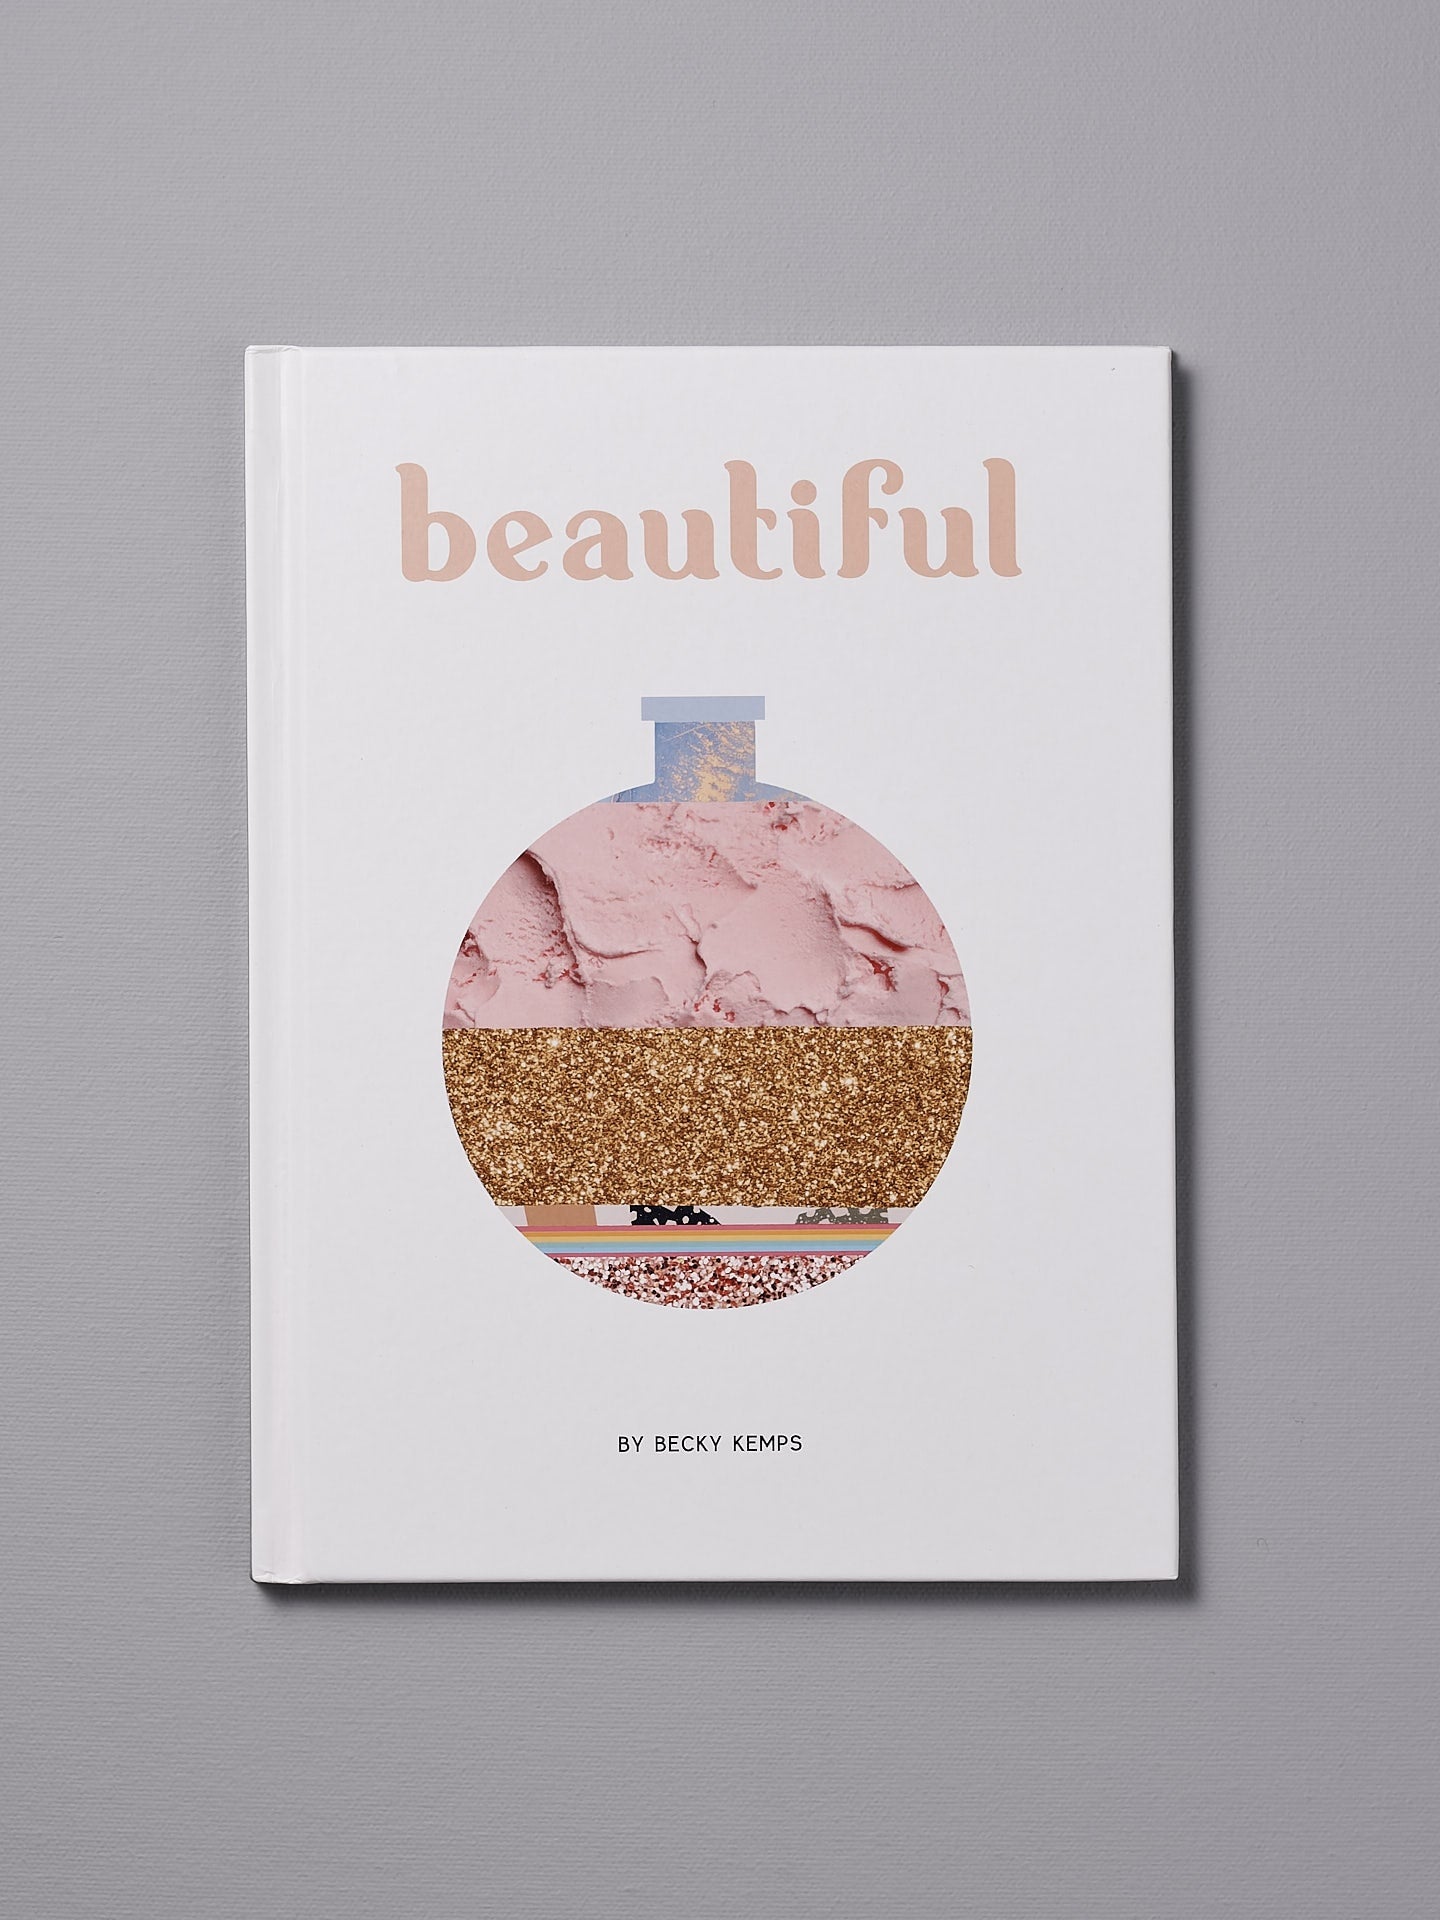 A unique book titled "Beautiful – by Becky Kemps" with a minimalistic cover design featuring abstract layered textures.